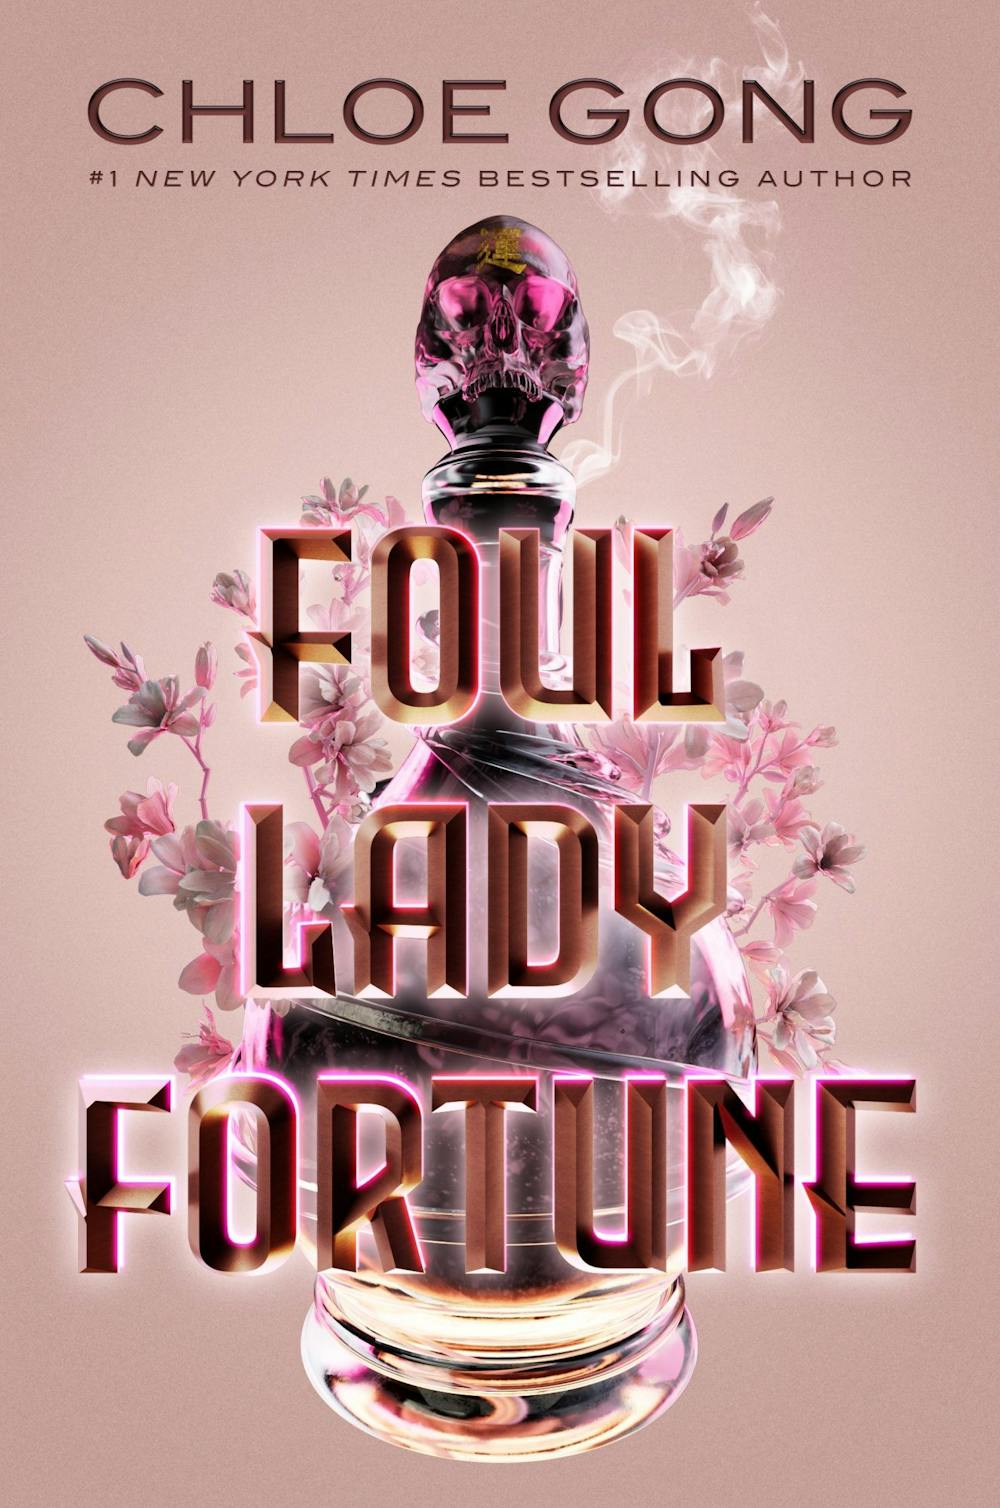 <p>Featured Image from <a href="https://www.goodreads.com/book/show/57190453-foul-lady-fortune" target="">Goodreads</a></p>